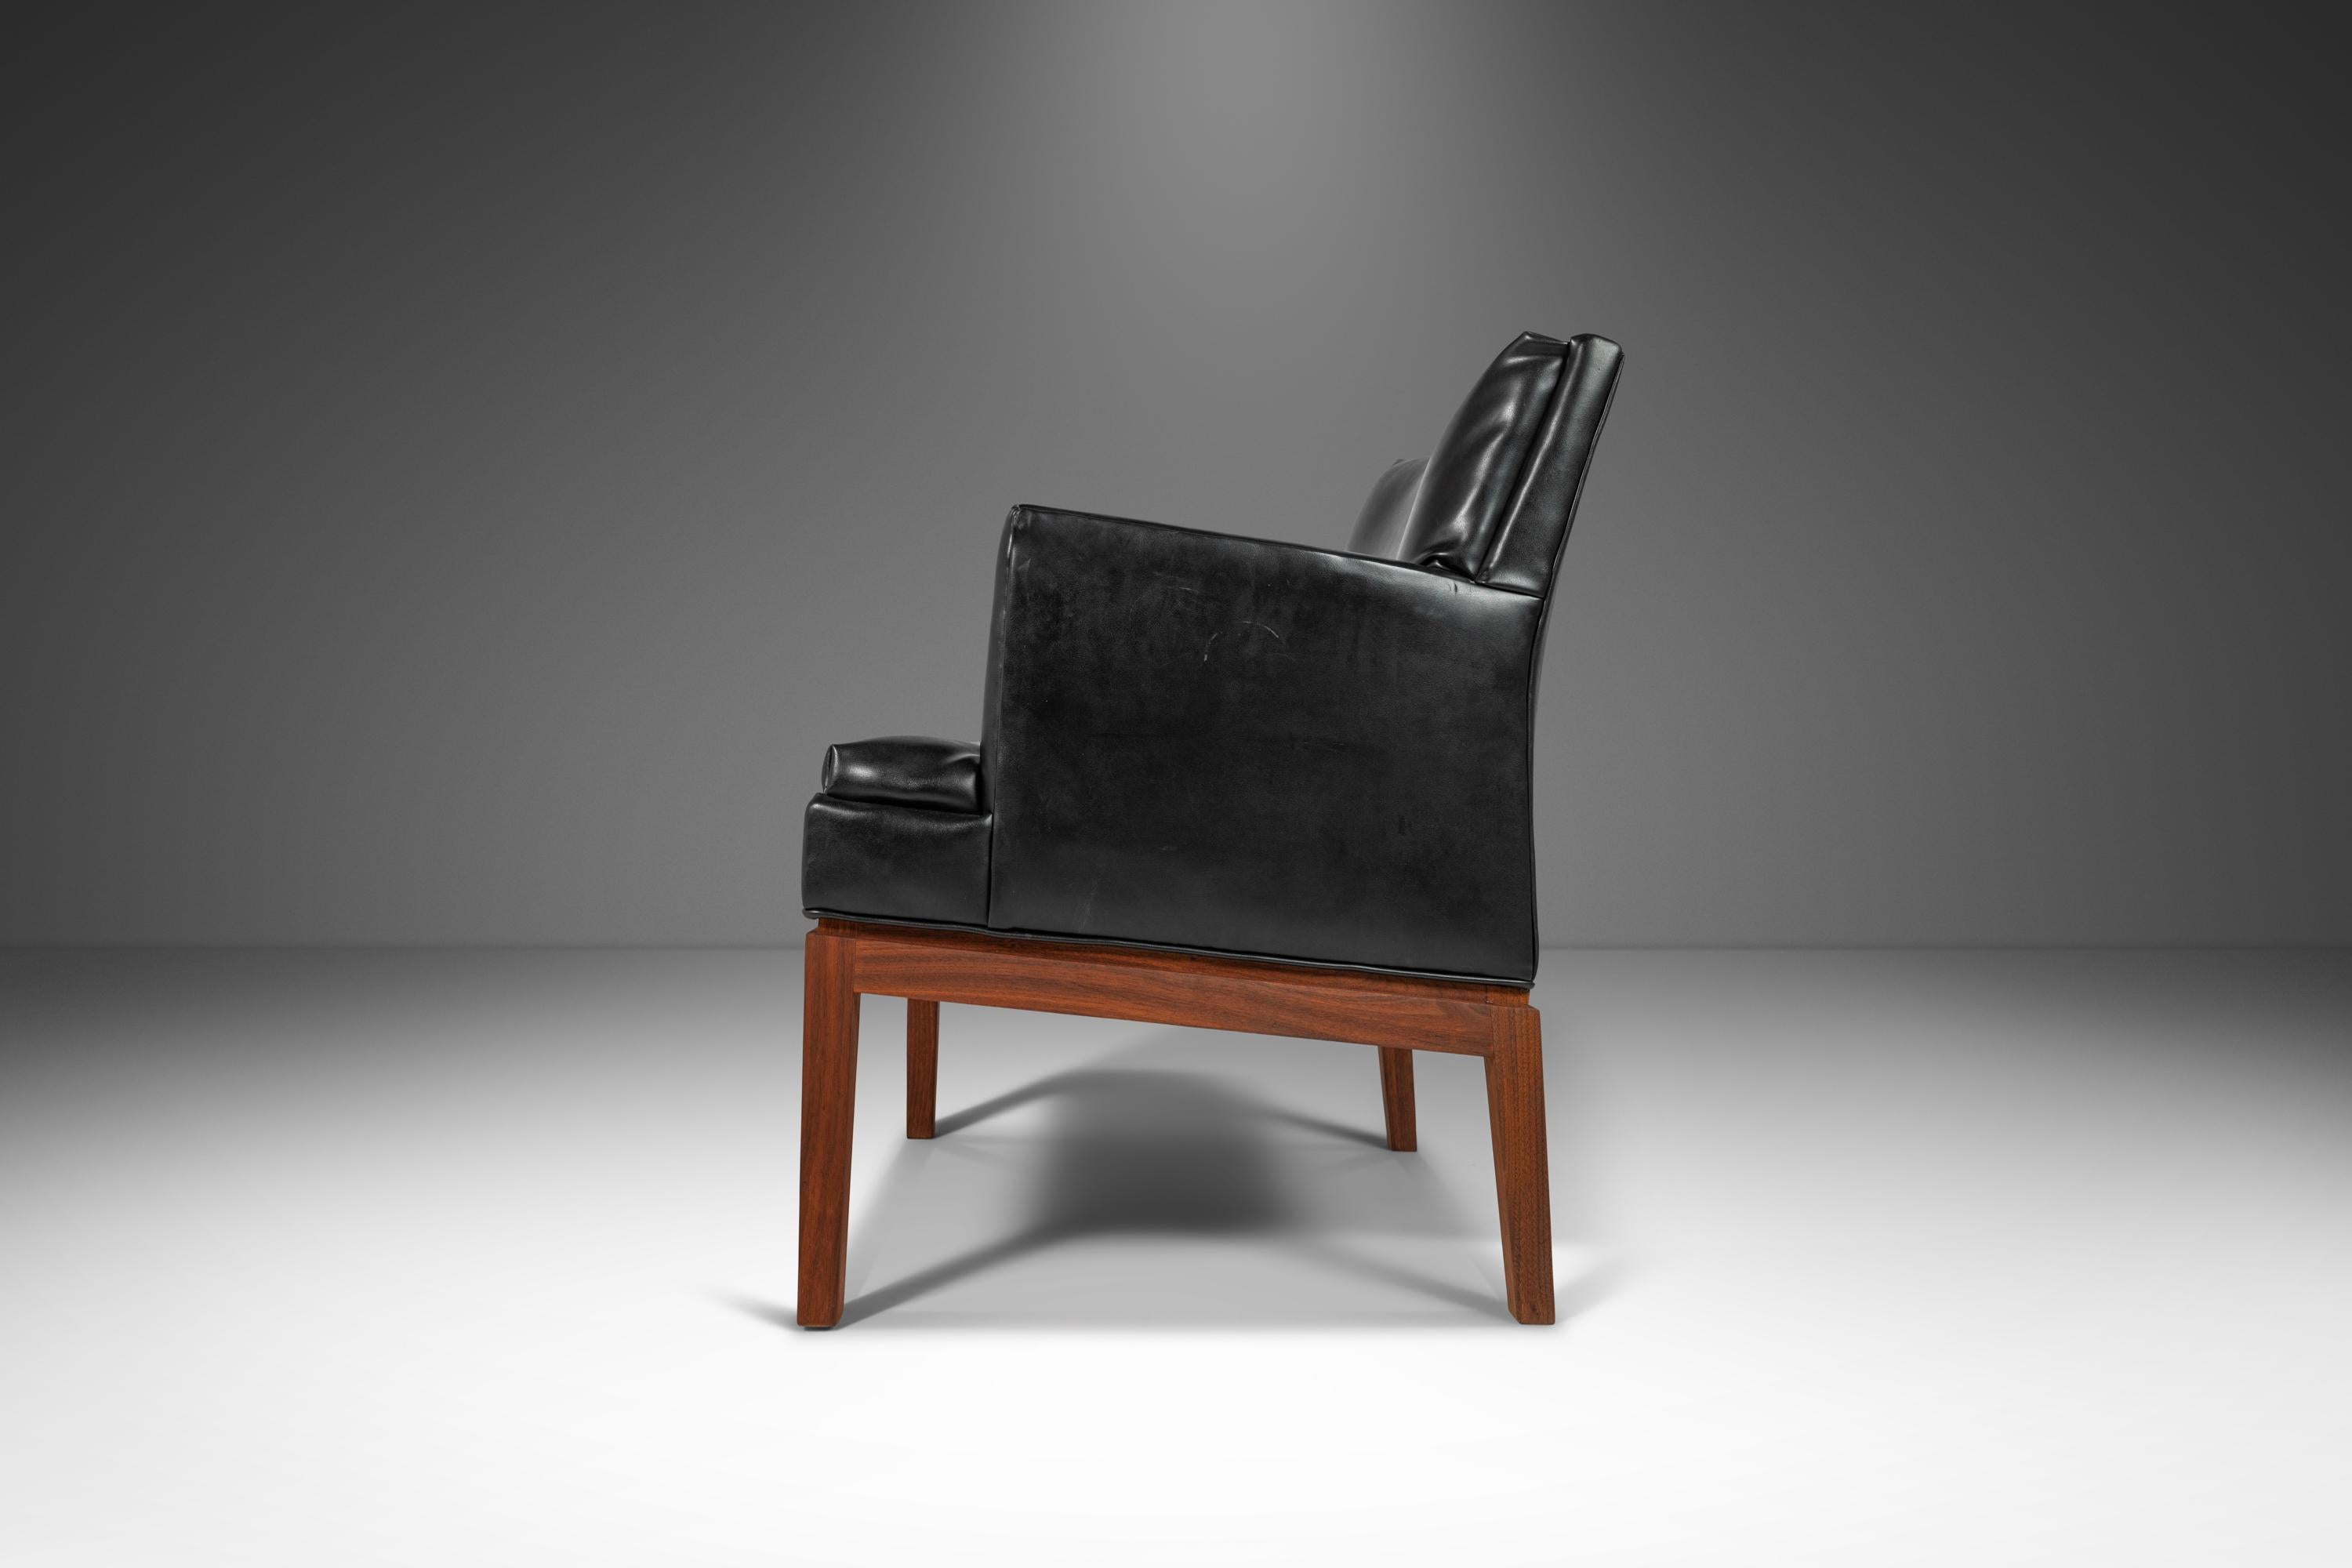 Set of 2 Lounge Chairs by Marble Imperial in Leatherette & Walnut, USA, c. 1960s For Sale 3